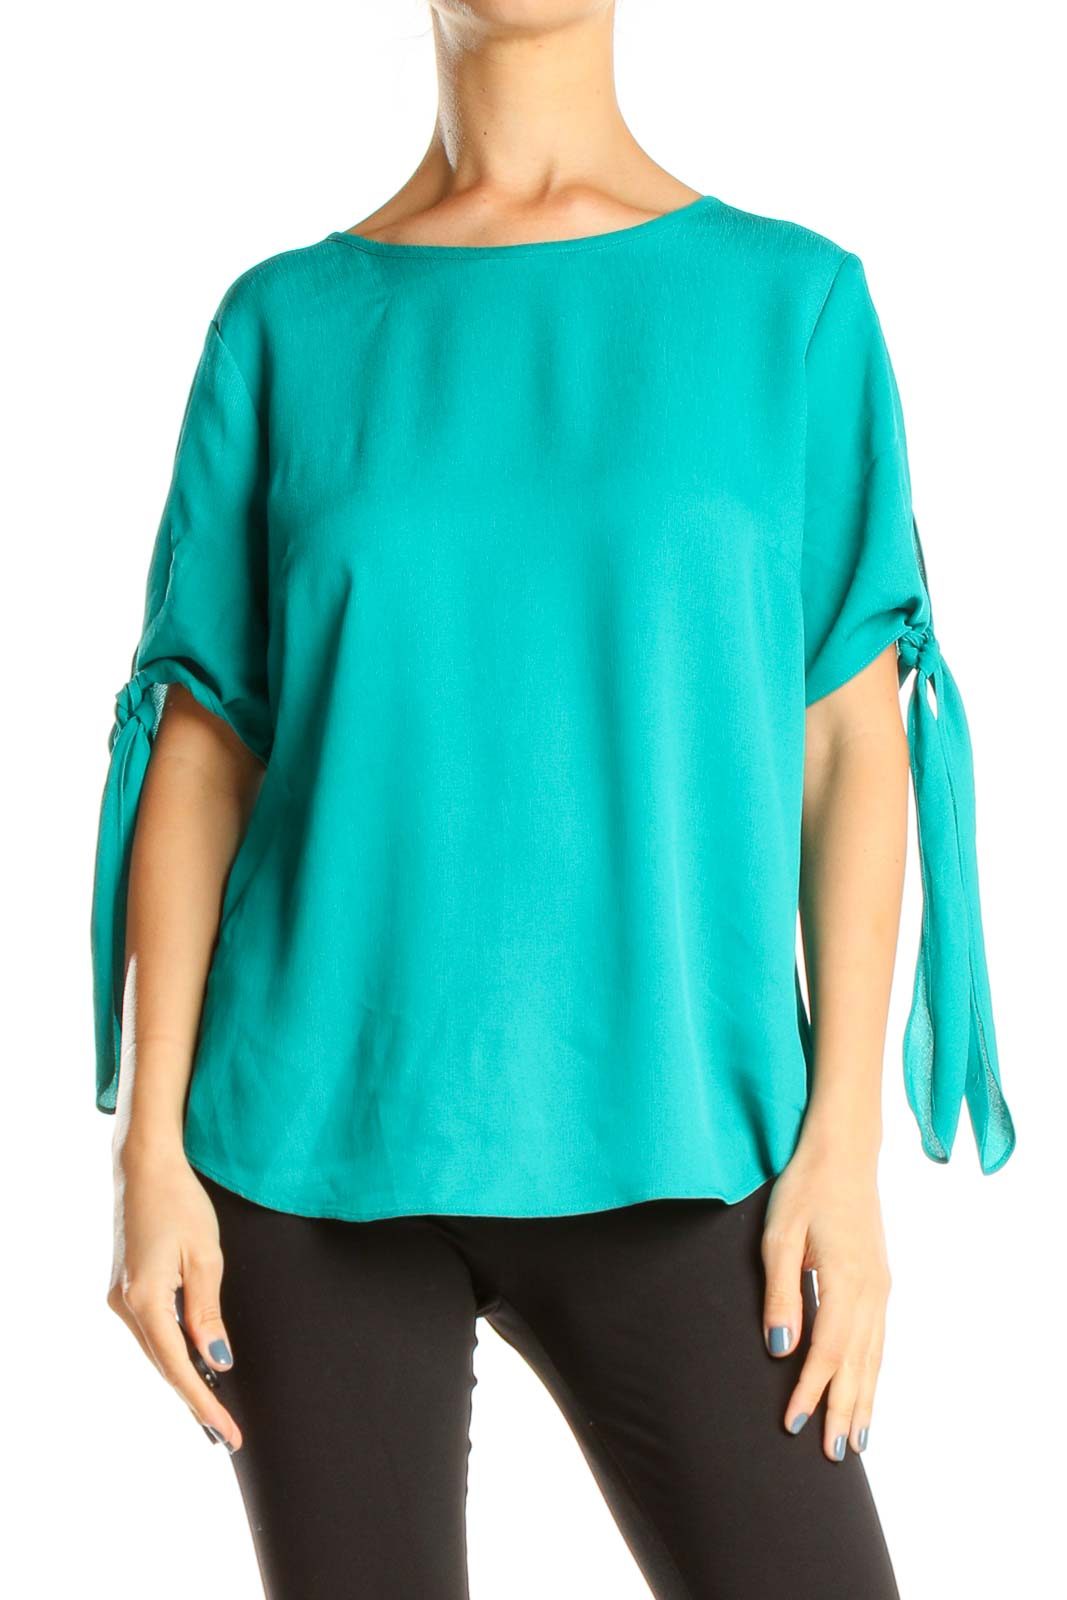 Blue All Day Wear Top Front